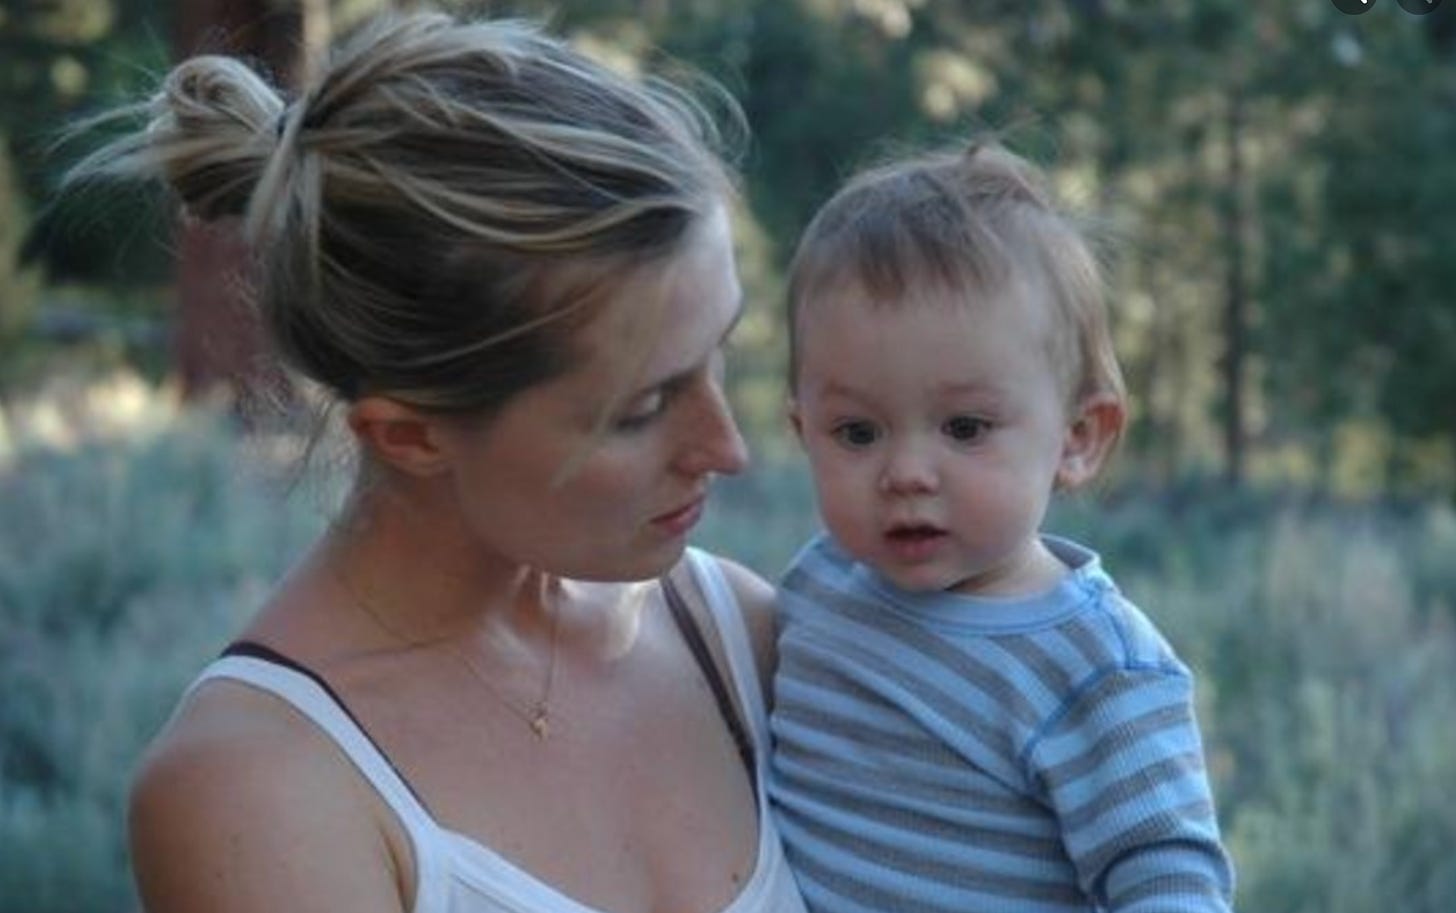 the author, a white woman with blonde hair in a bun, holding her little boy, also blonde, age 1